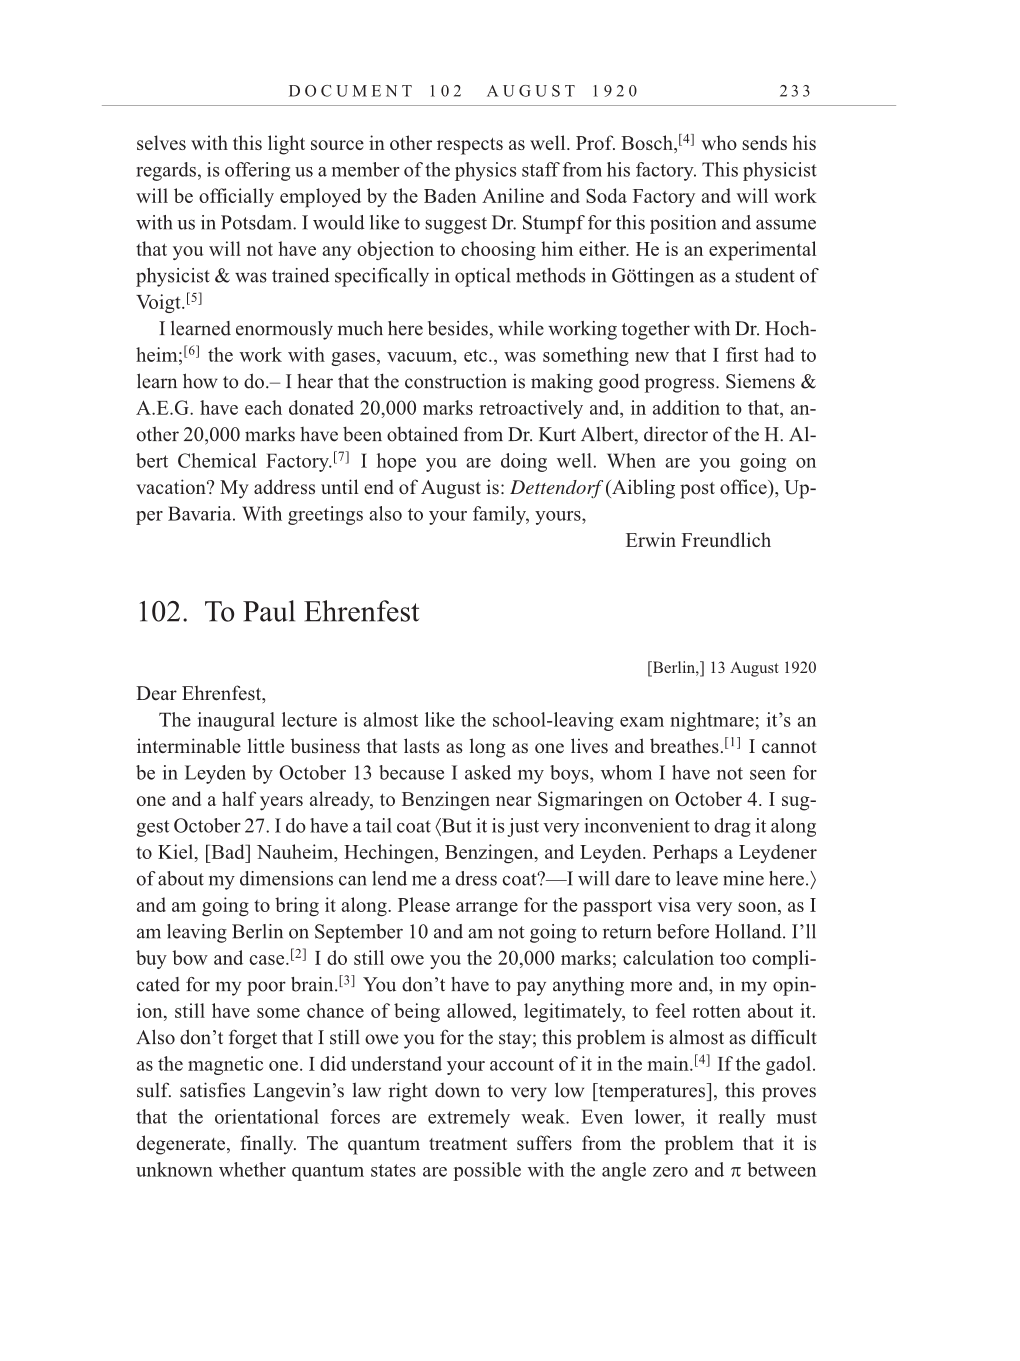 Volume 10: The Berlin Years: Correspondence, May-December 1920, and Supplementary Correspondence, 1909-1920 (English translation supplement) page 233